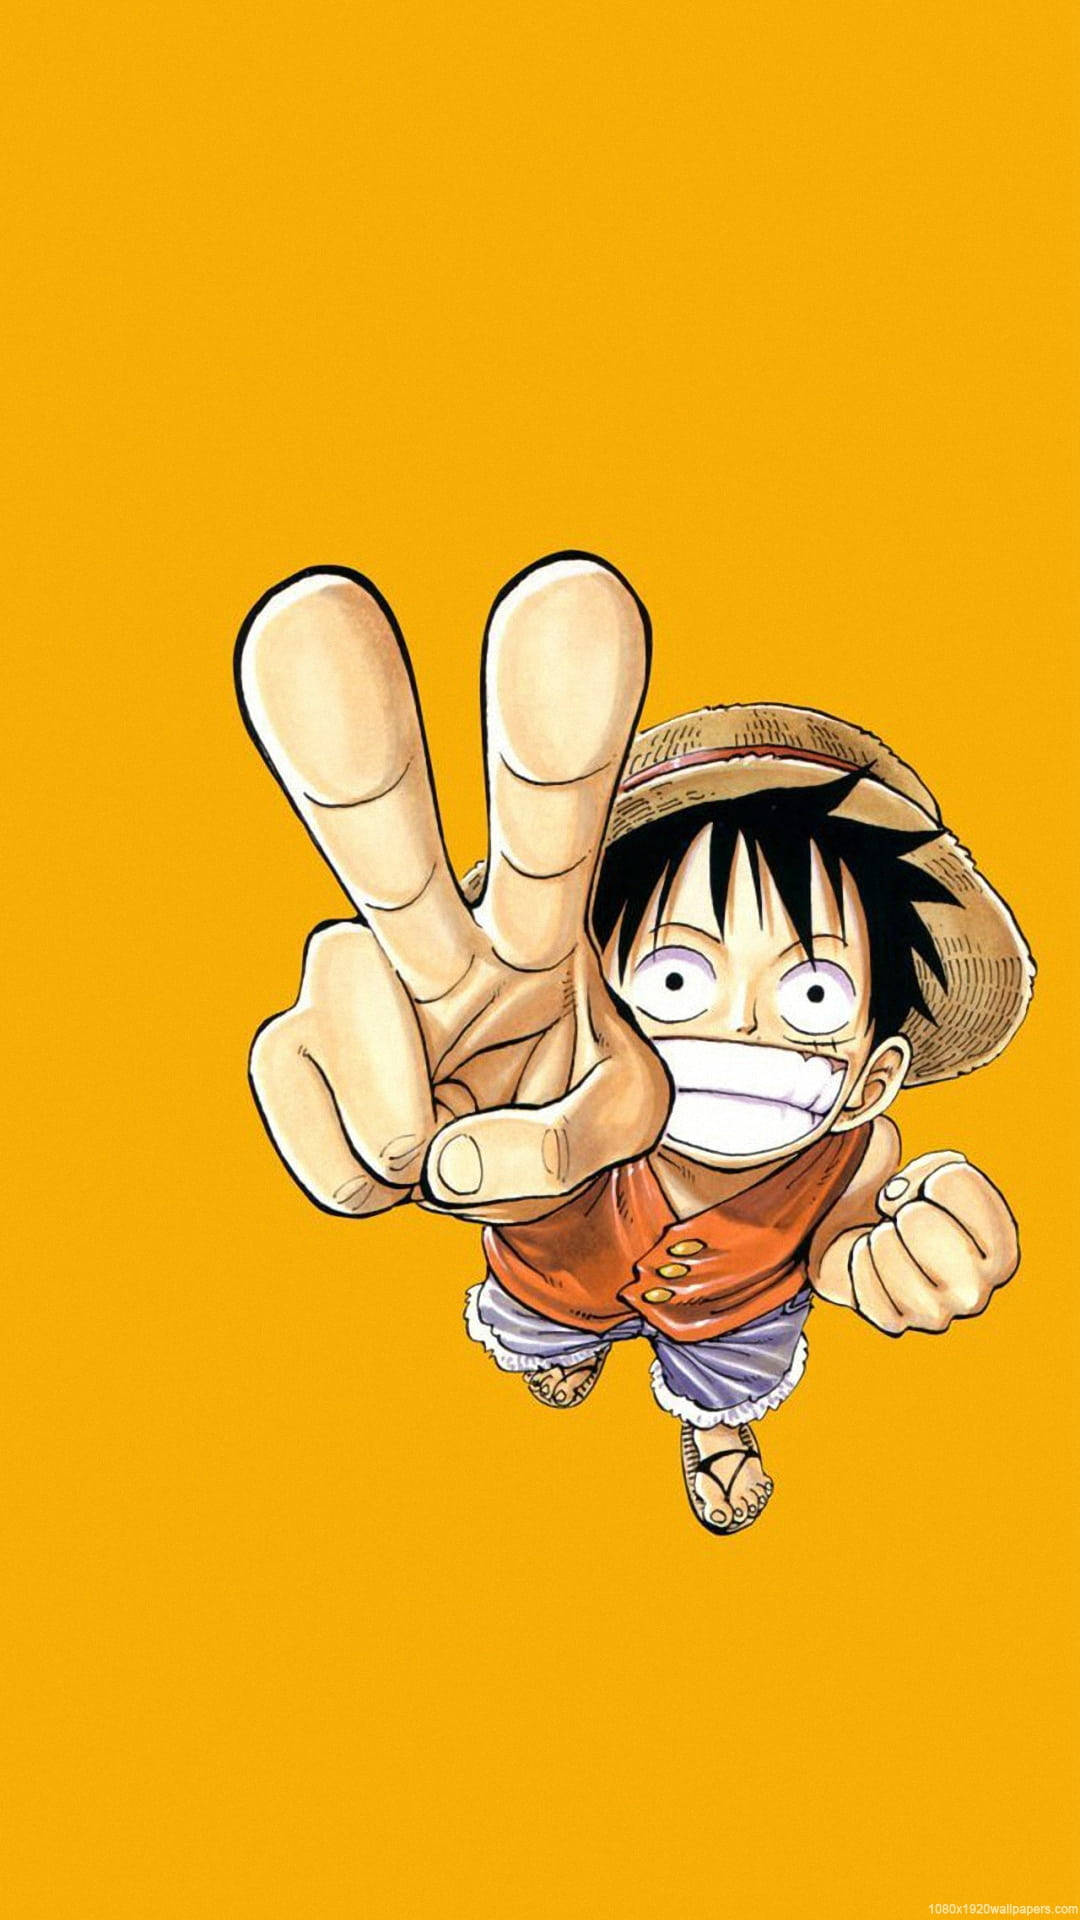 Smiling One Piece Luffy PFP Victory Sign Wallpaper